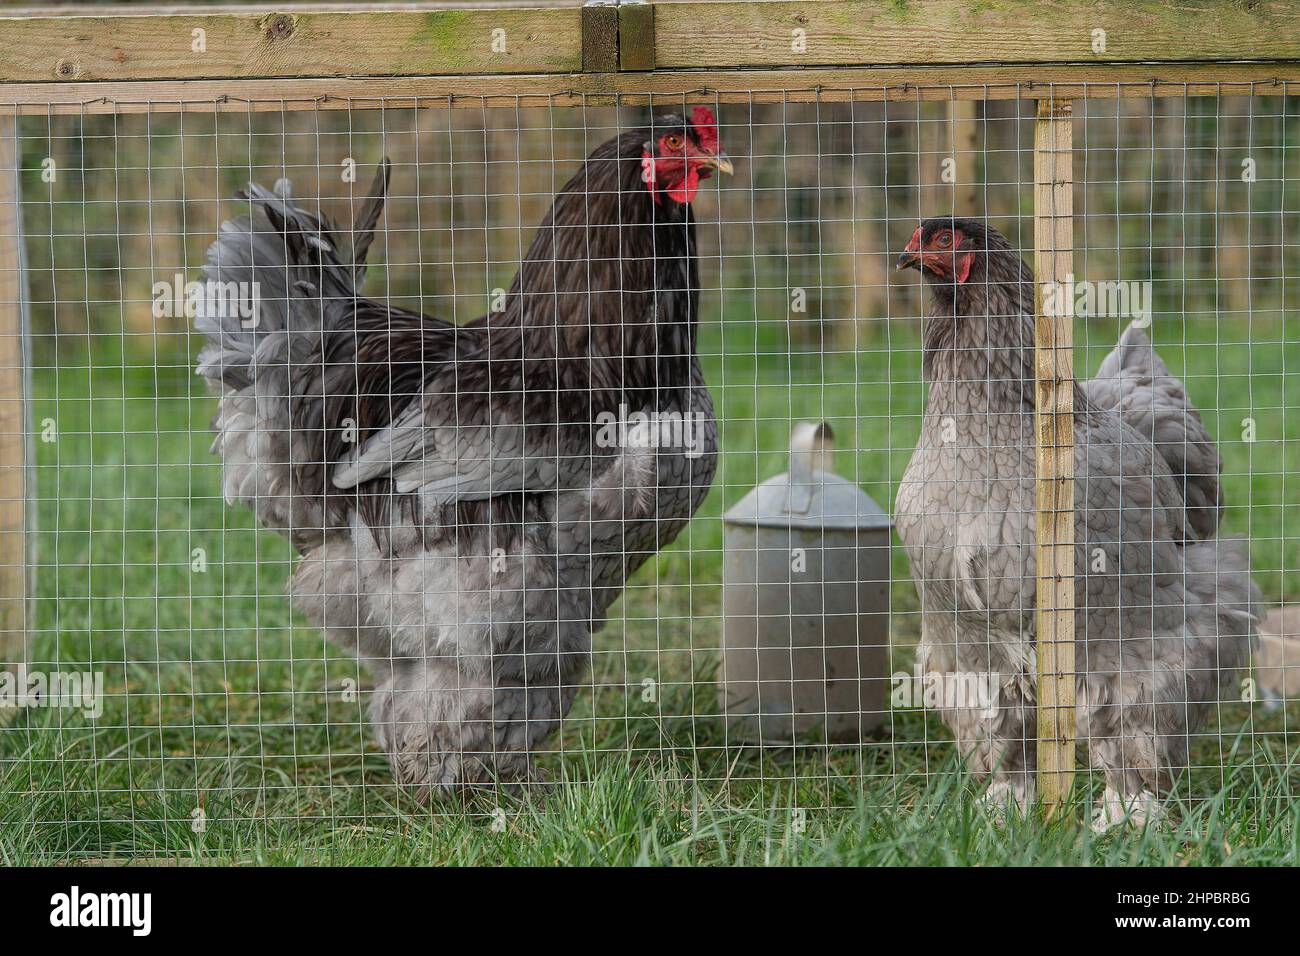 pair of blue Brahma chickens in a chicken coop Stock Photo